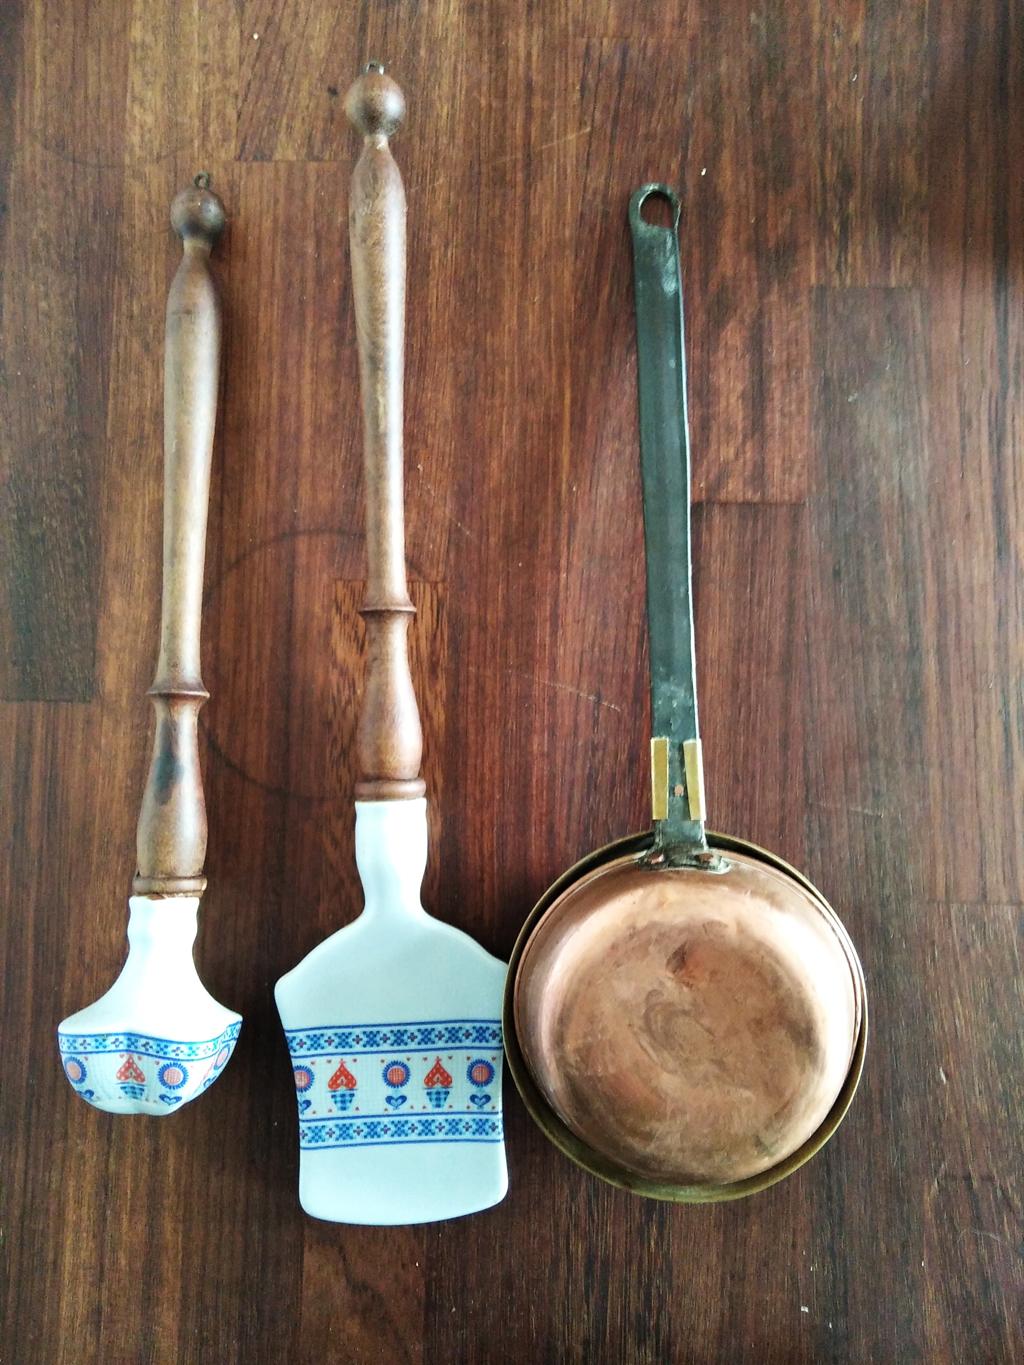 Blue and white ceramic or porcelain kitchen mortars or pestles with wooden handles, to hang 

Wall kitchen decoration.
   